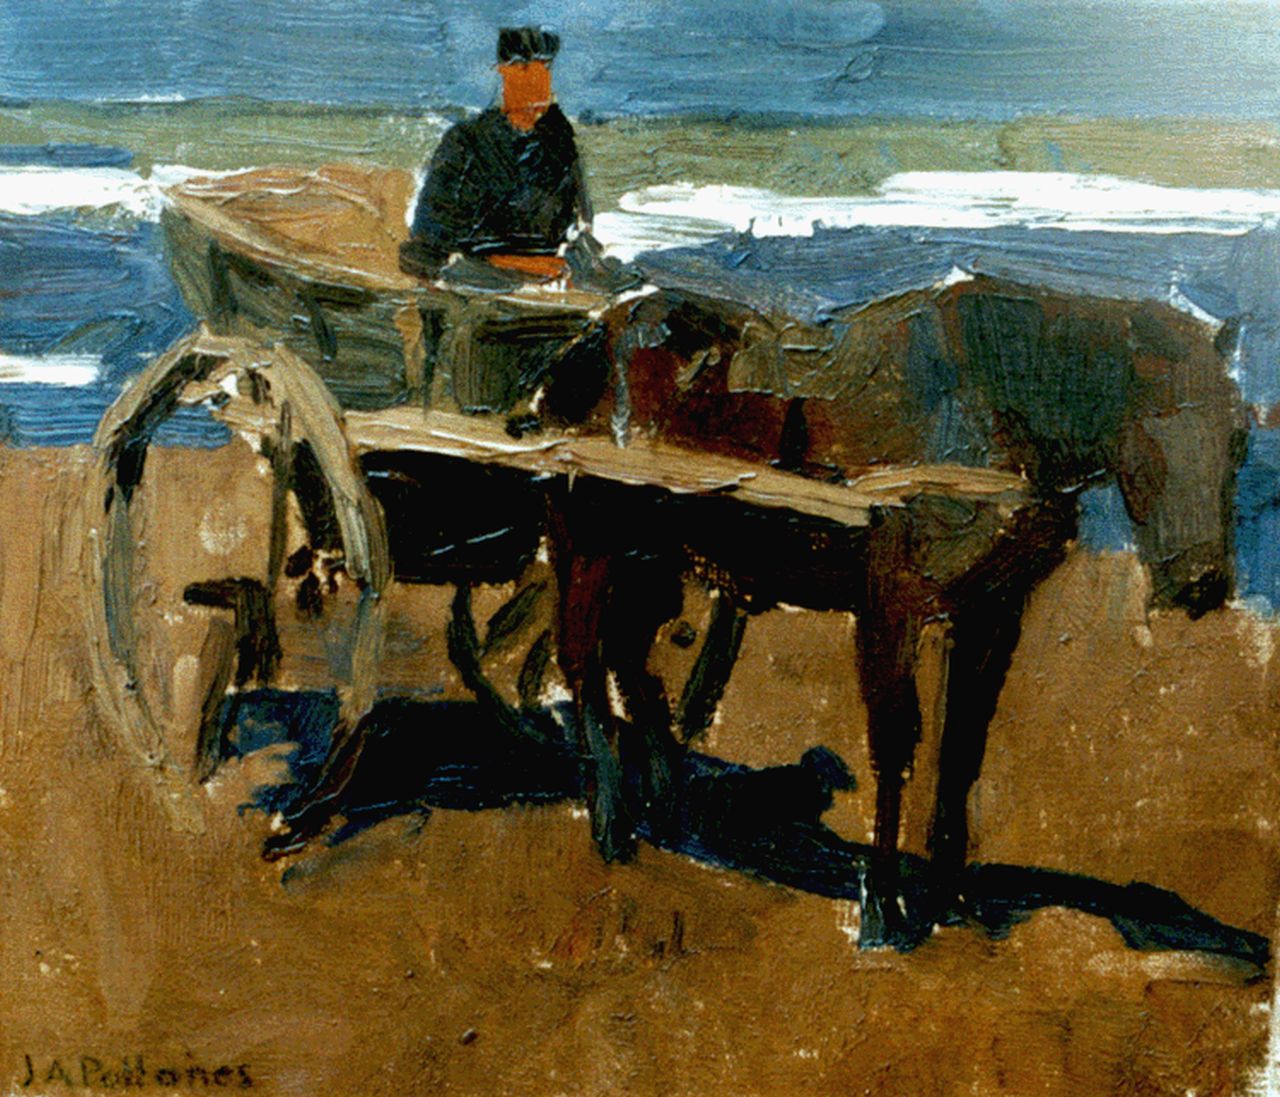 Pollones J.A.  | Jean Albert Pollones, Horsedrawn cart on the beach, oil on canvas 27.4 x 31.4 cm, signed l.l.